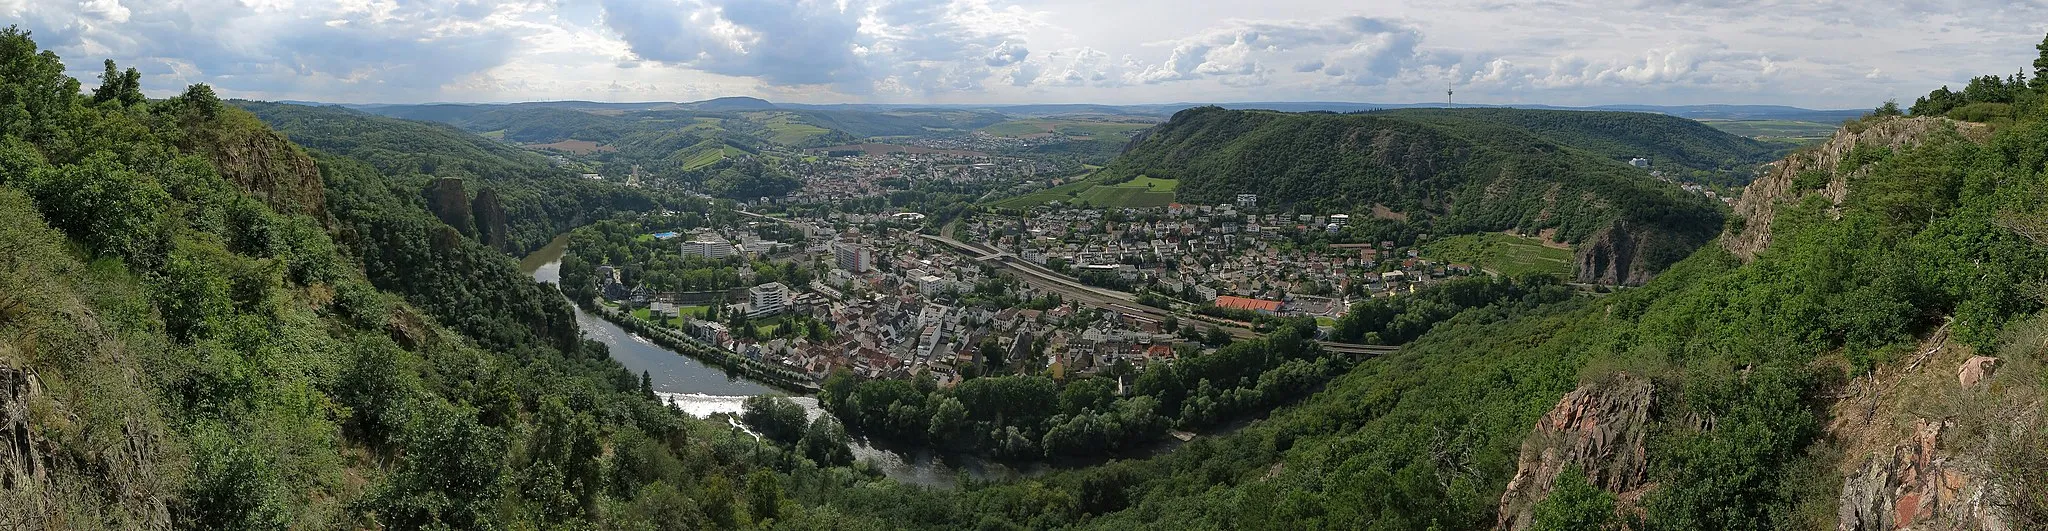 Photo showing: View from the Gans-Mountain (321 m) down to Bad Münster am Stein in the Nahe valley. Horizontal angle: 225°, viewing direction: west in the middle of the image.